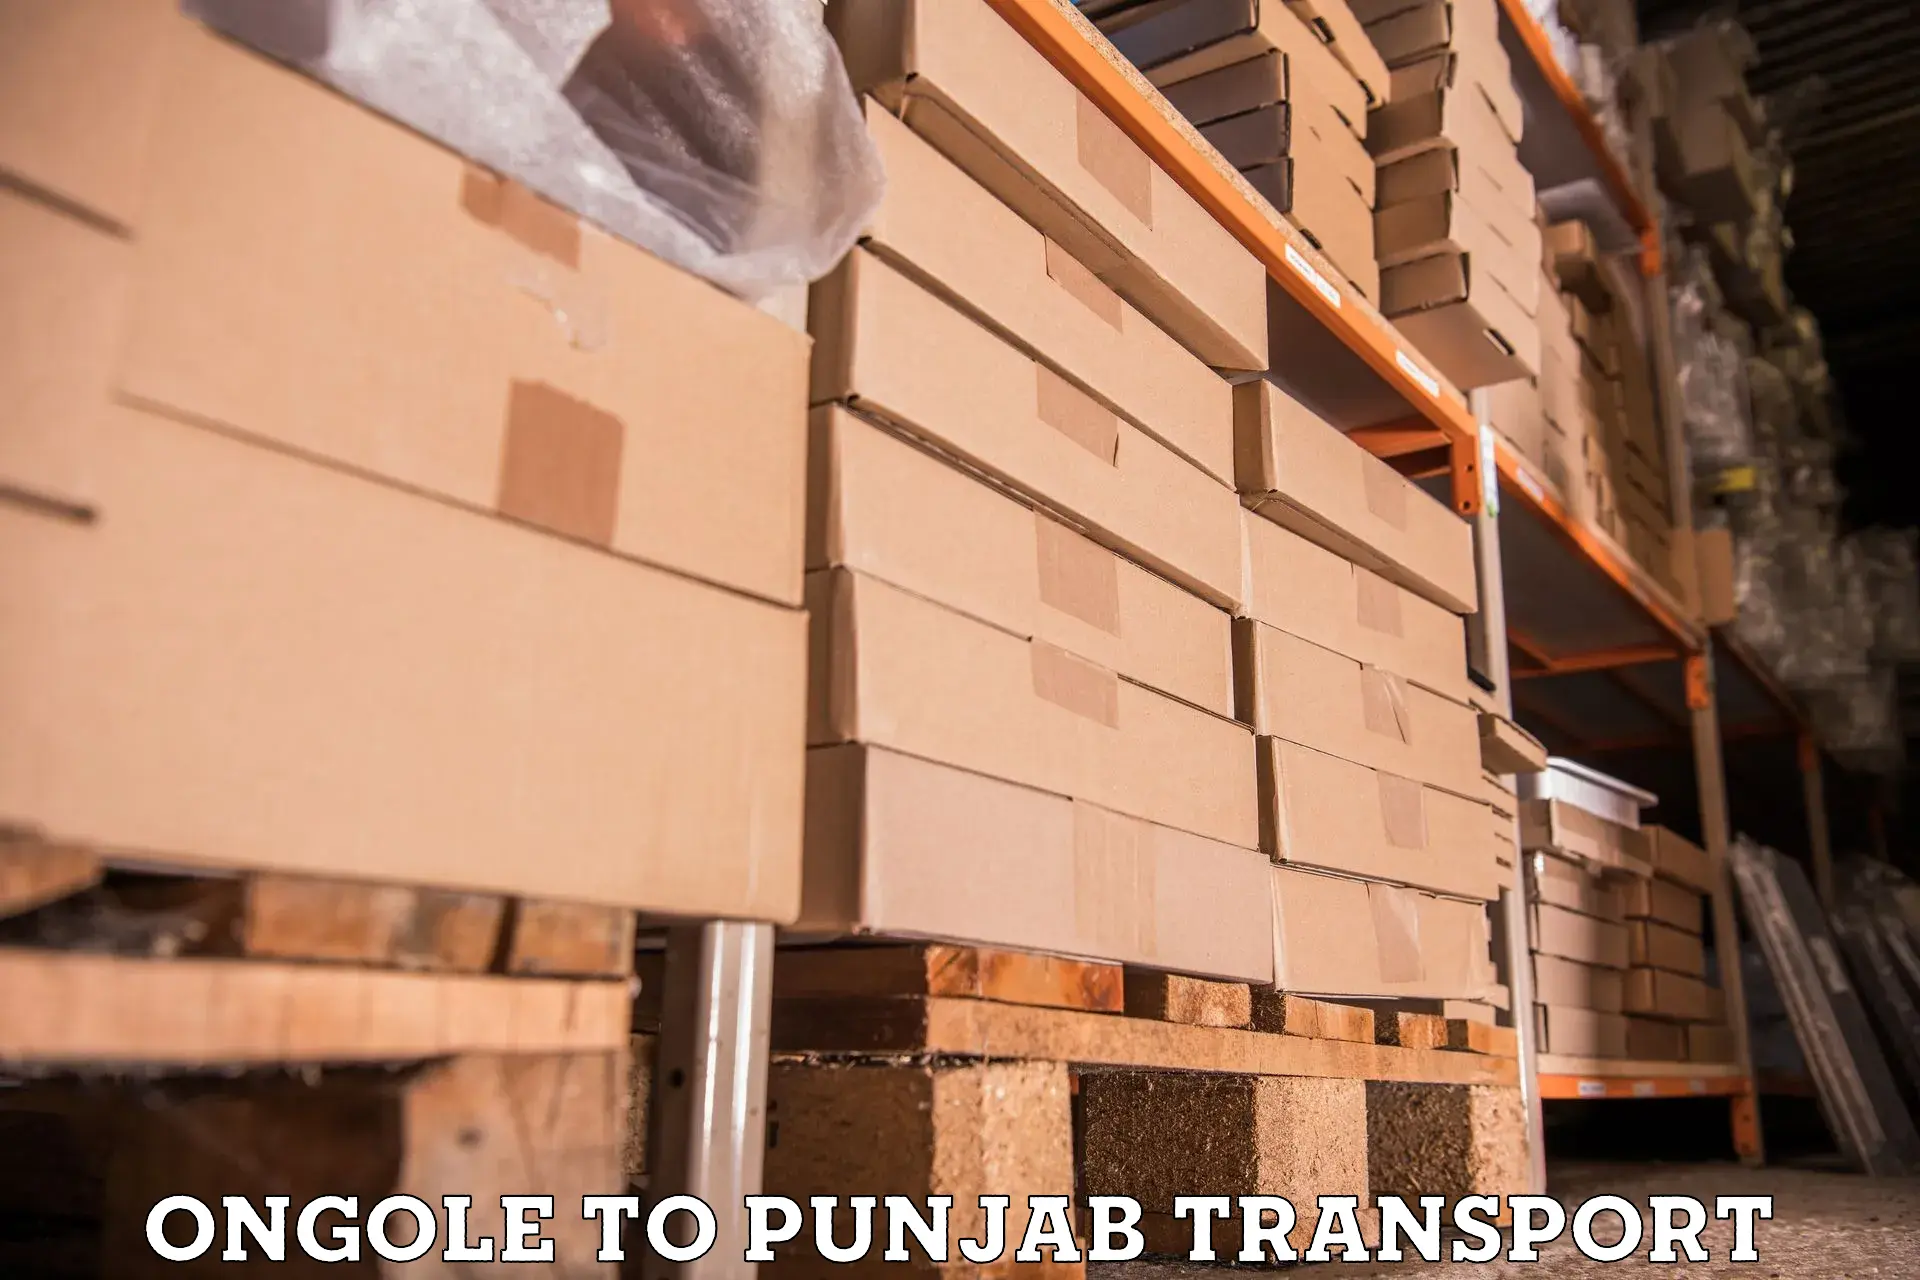 Furniture transport service Ongole to Patiala